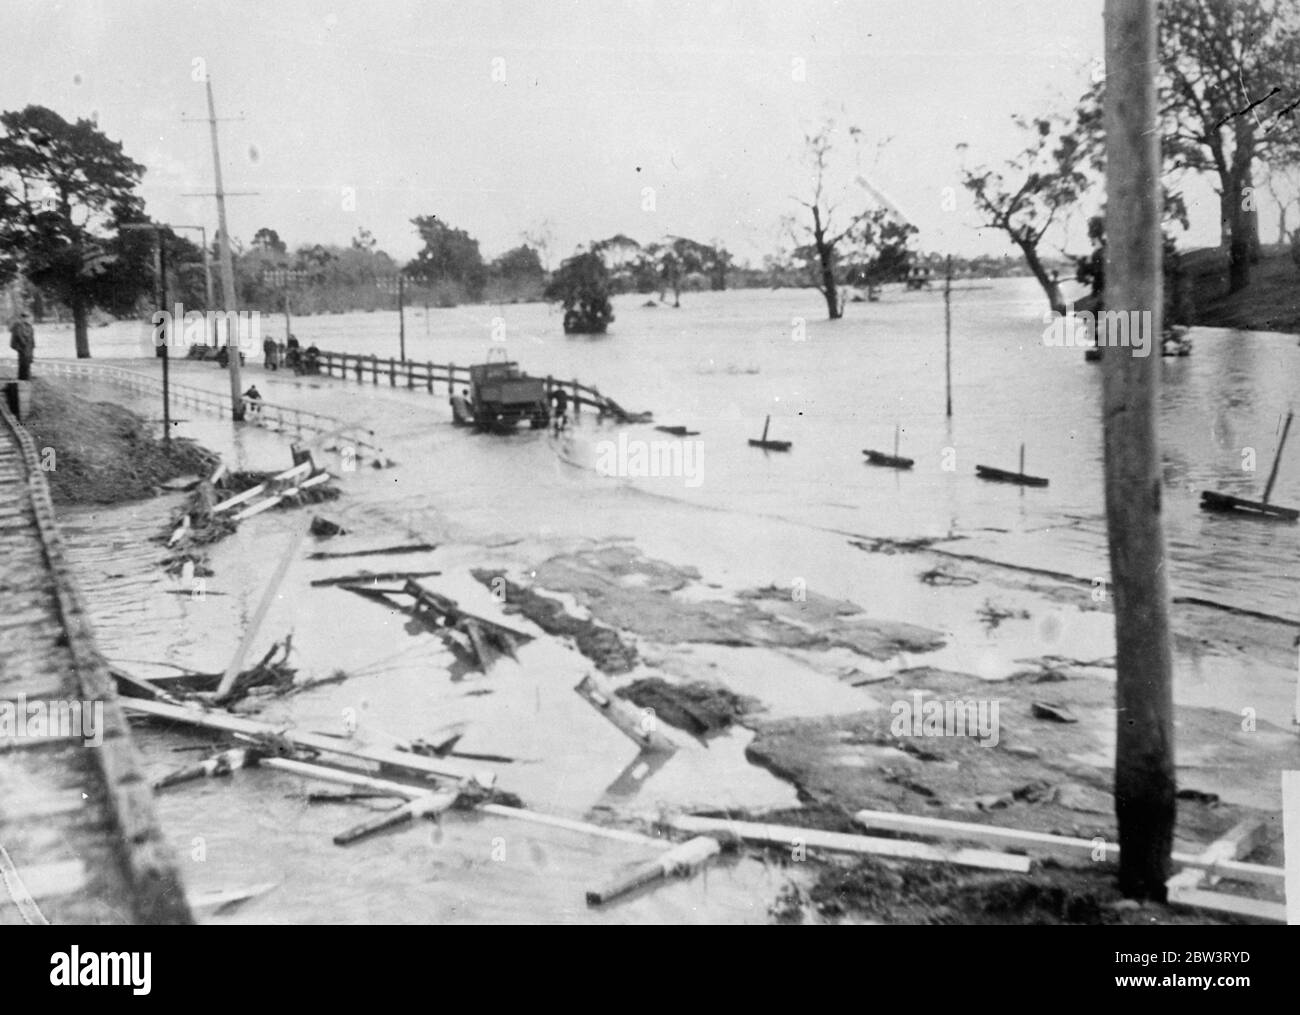 Many Feared Drowned , Hundreds Homeless In Australian Floods . Roads And Bridges Wrecked . Roads , bridges and all other communications broke down near Bairnsdale in the Eastern Gippsland district of Victoria , Australia , as the result of serious floods . Hundreds of families lost their homes and thousands of cattle died . Many people were forced to seek safety on the roofs of buildings and 23 persons were rescued from the roof of one house near Bairnsdale . Police feared , however , that numbers of farmers and members of their families had been trapped and drowned . The floods were caused by Stock Photo